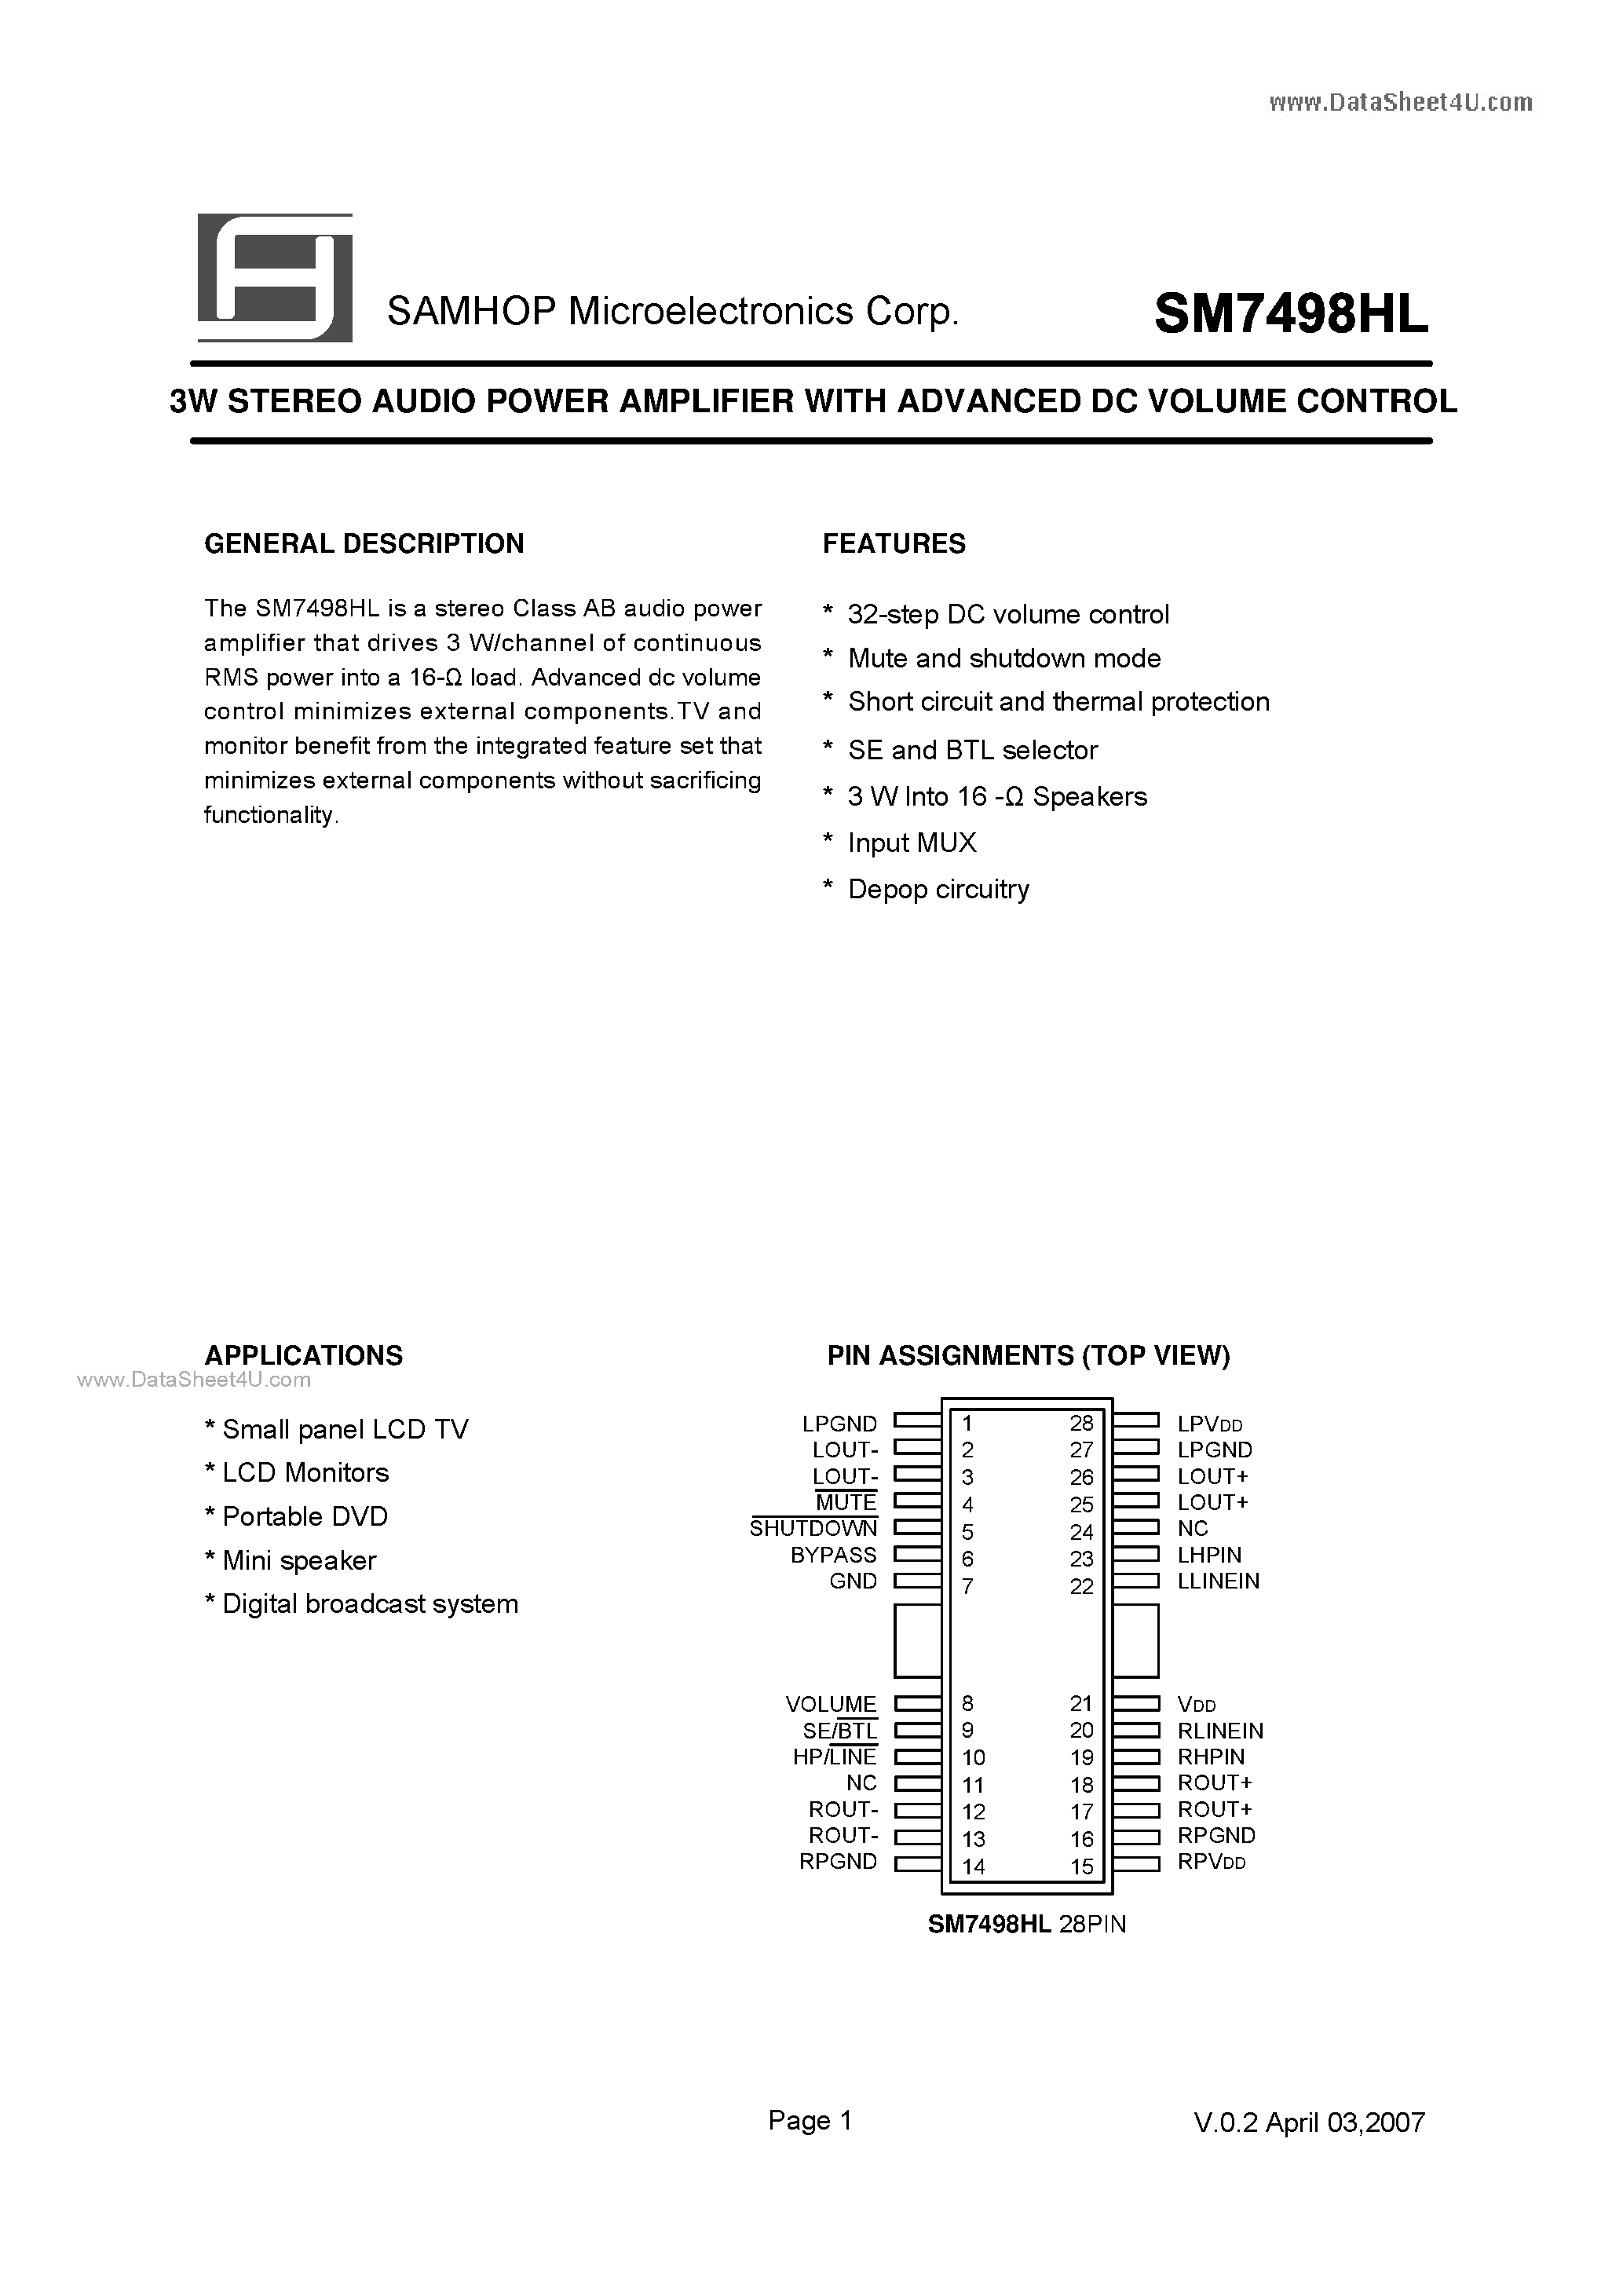 Datasheet SM7498HL - 3W STEREO AUDIO POWER AMPLIFIER page 2